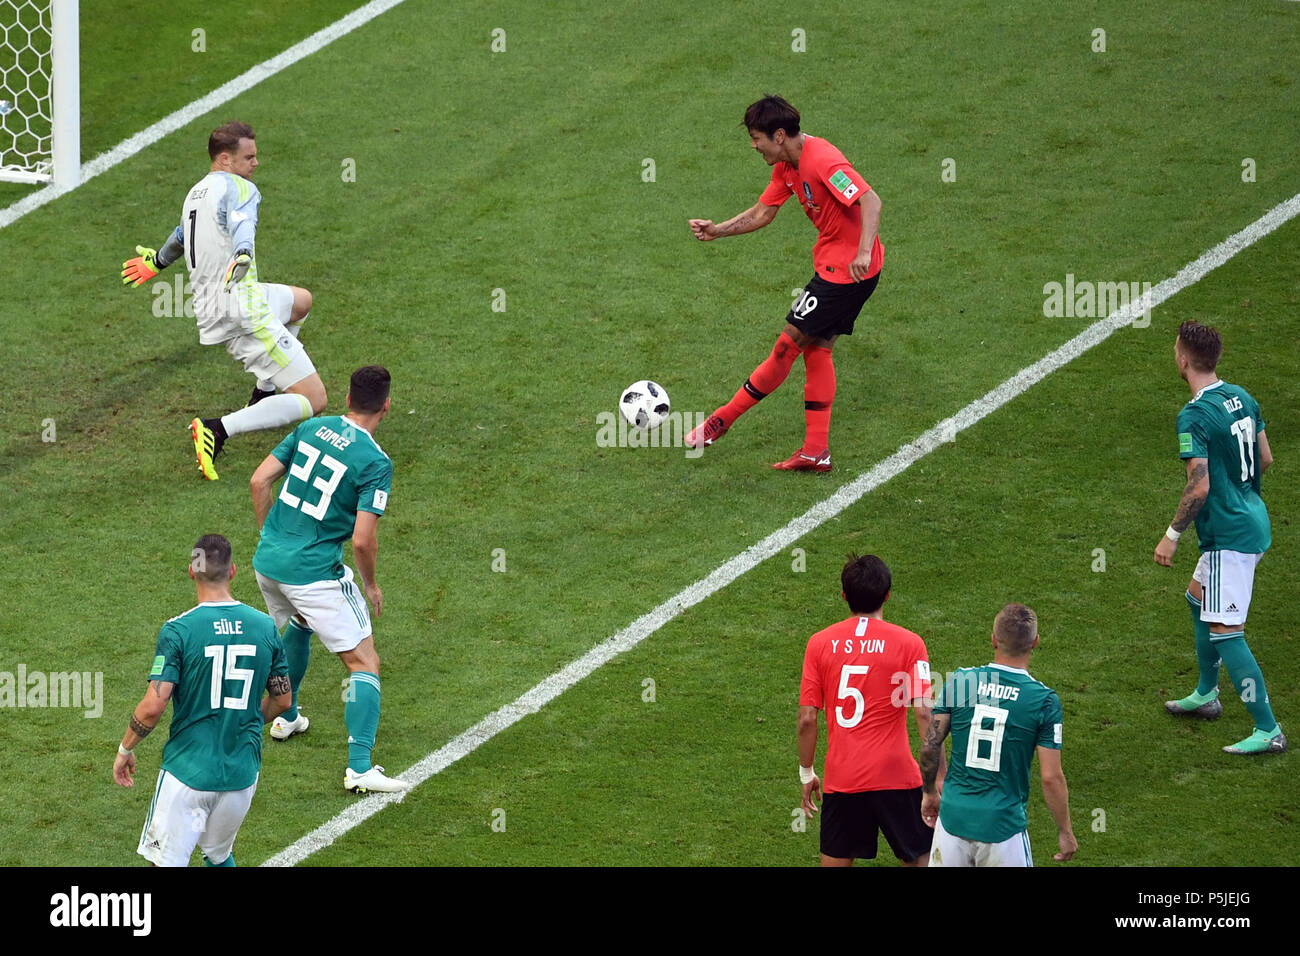 Kazan, Russia. 27th June, 2018. Soccer, FIFA World Cup, group F preliminary, Germany vs South Korea at the Kazan-Arena. South Korea's Young-Gwon Kim (top) scores the 1:0 goal. Credit: Ina Fassbender/dpa/Alamy Live News Stock Photo